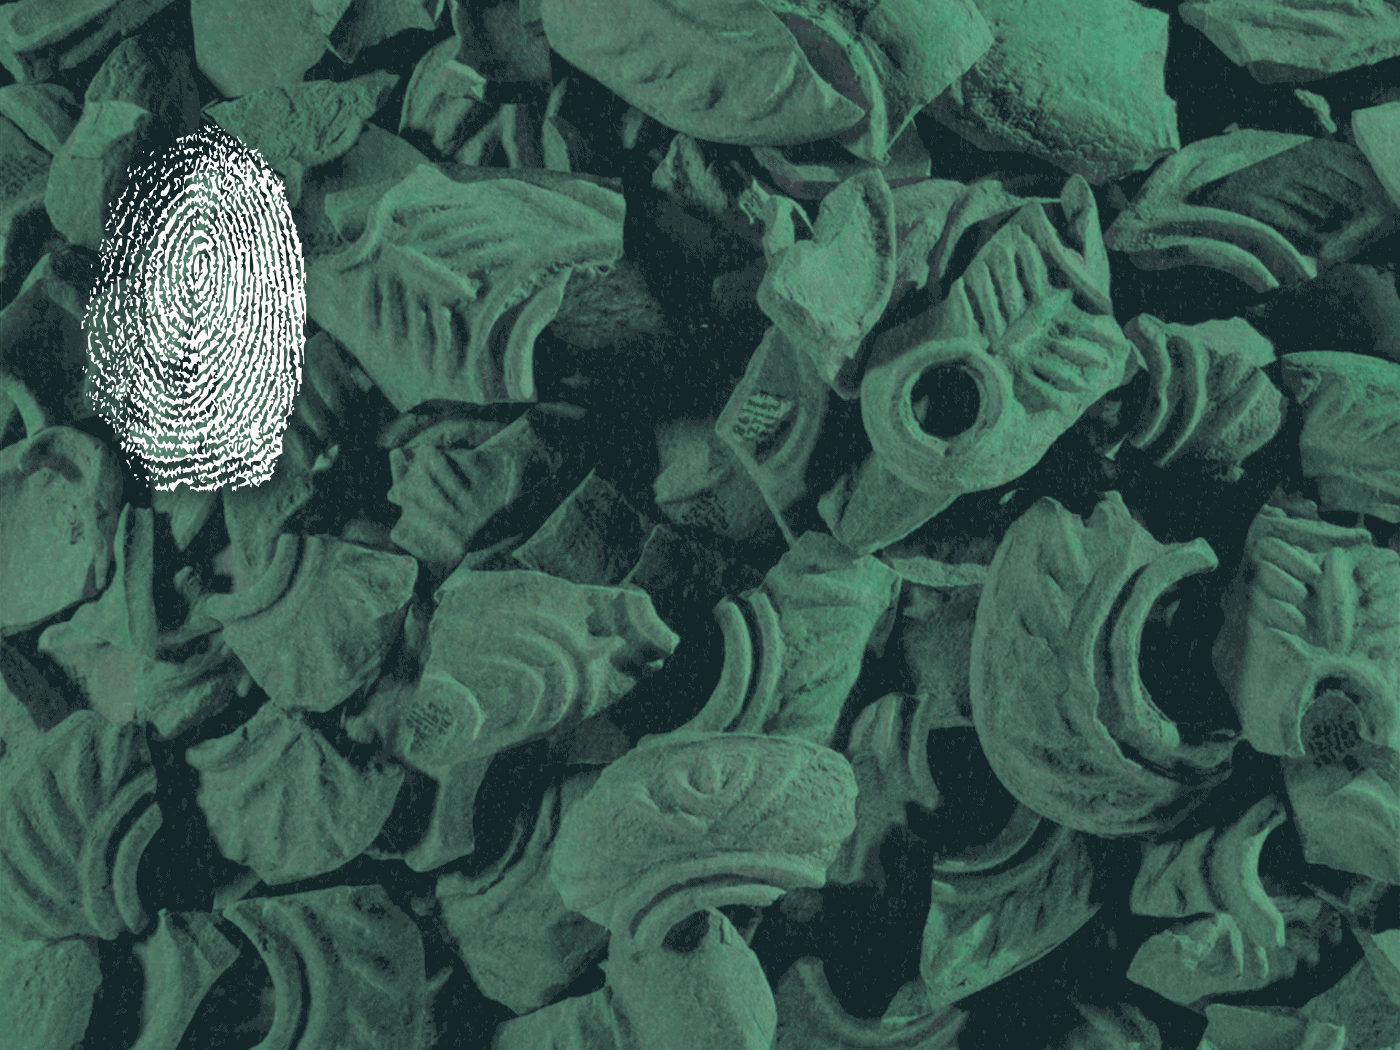 A GIF illustration of fingerprints appearing on top of a green-hued photo of pottery shards